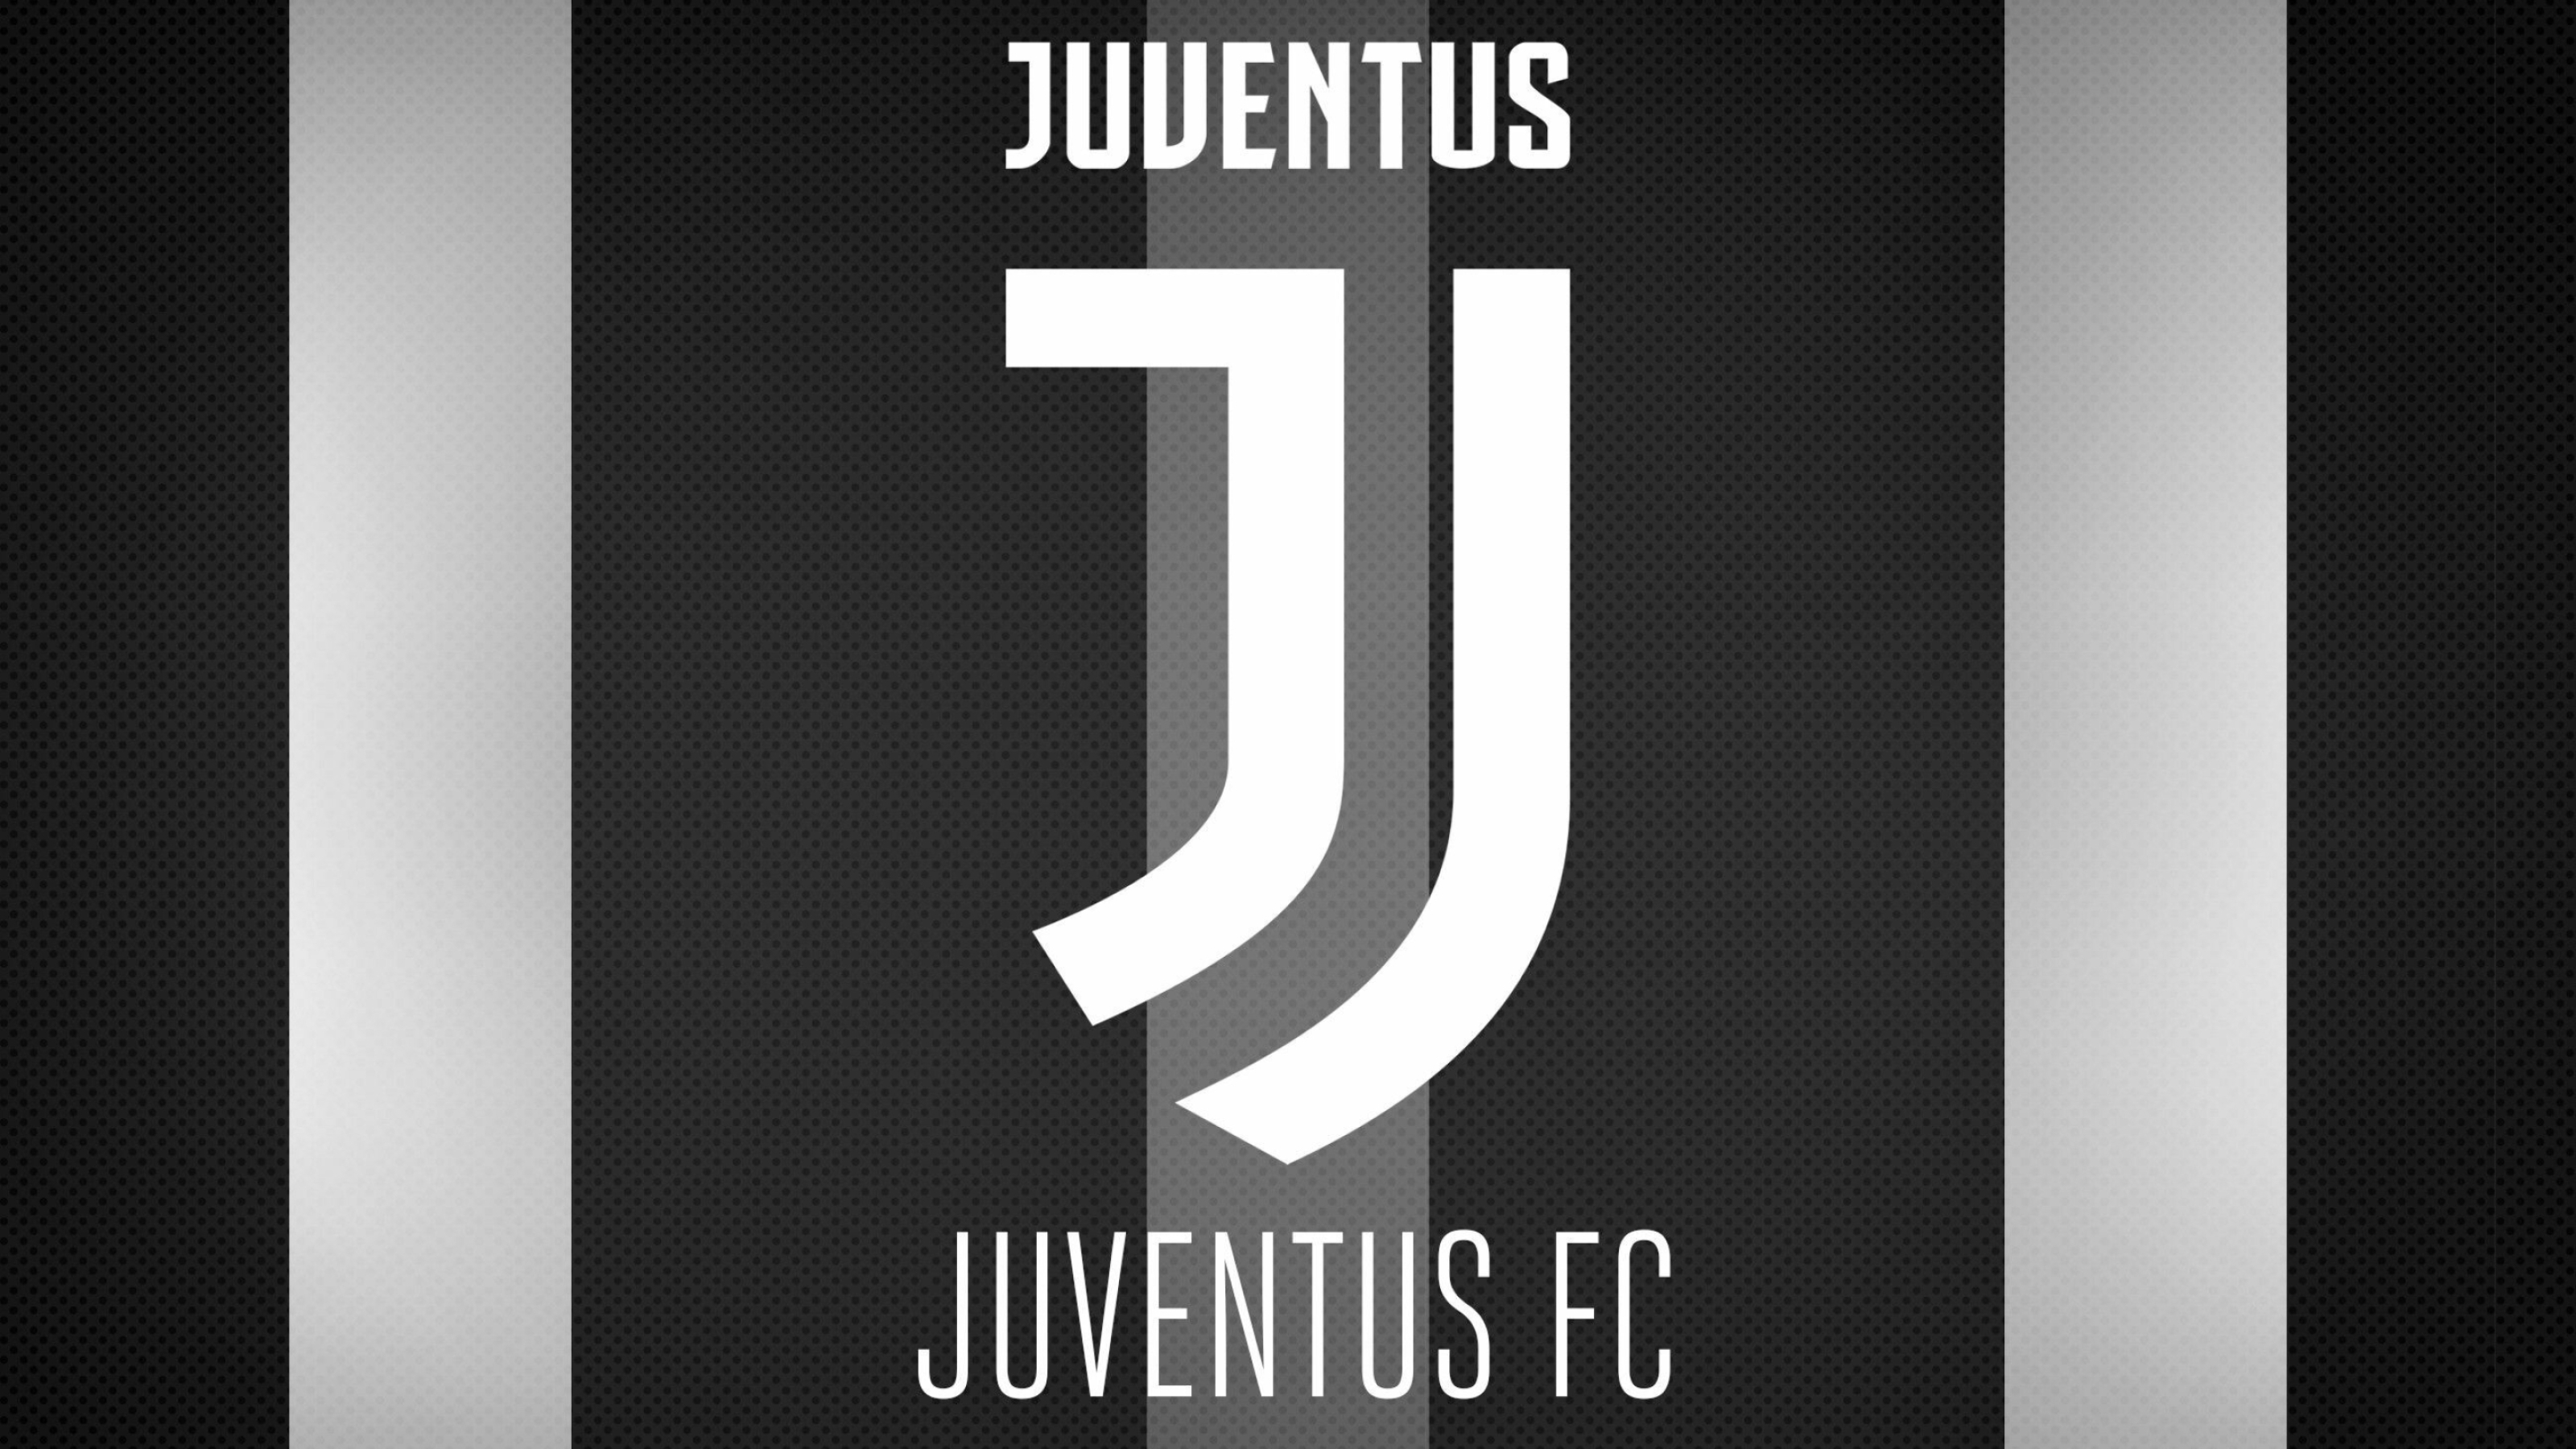 Forza Juve, Cool Juventus wallpapers, Free download, Awesome backgrounds, 3200x1800 HD Desktop